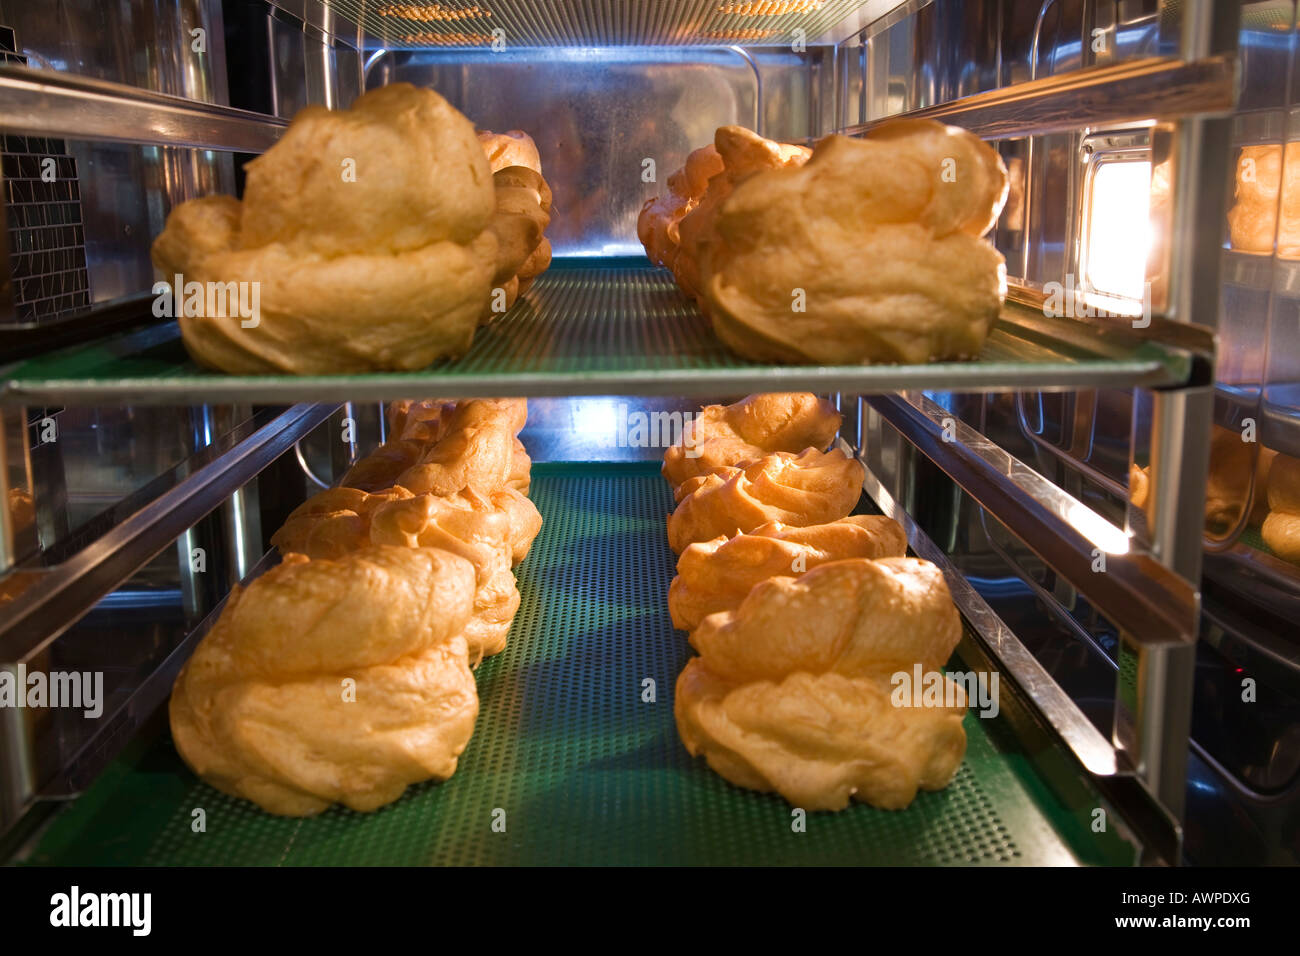 Profiteroles or cream puff pastries, baked golden-brown and fresh out of the oven Stock Photo